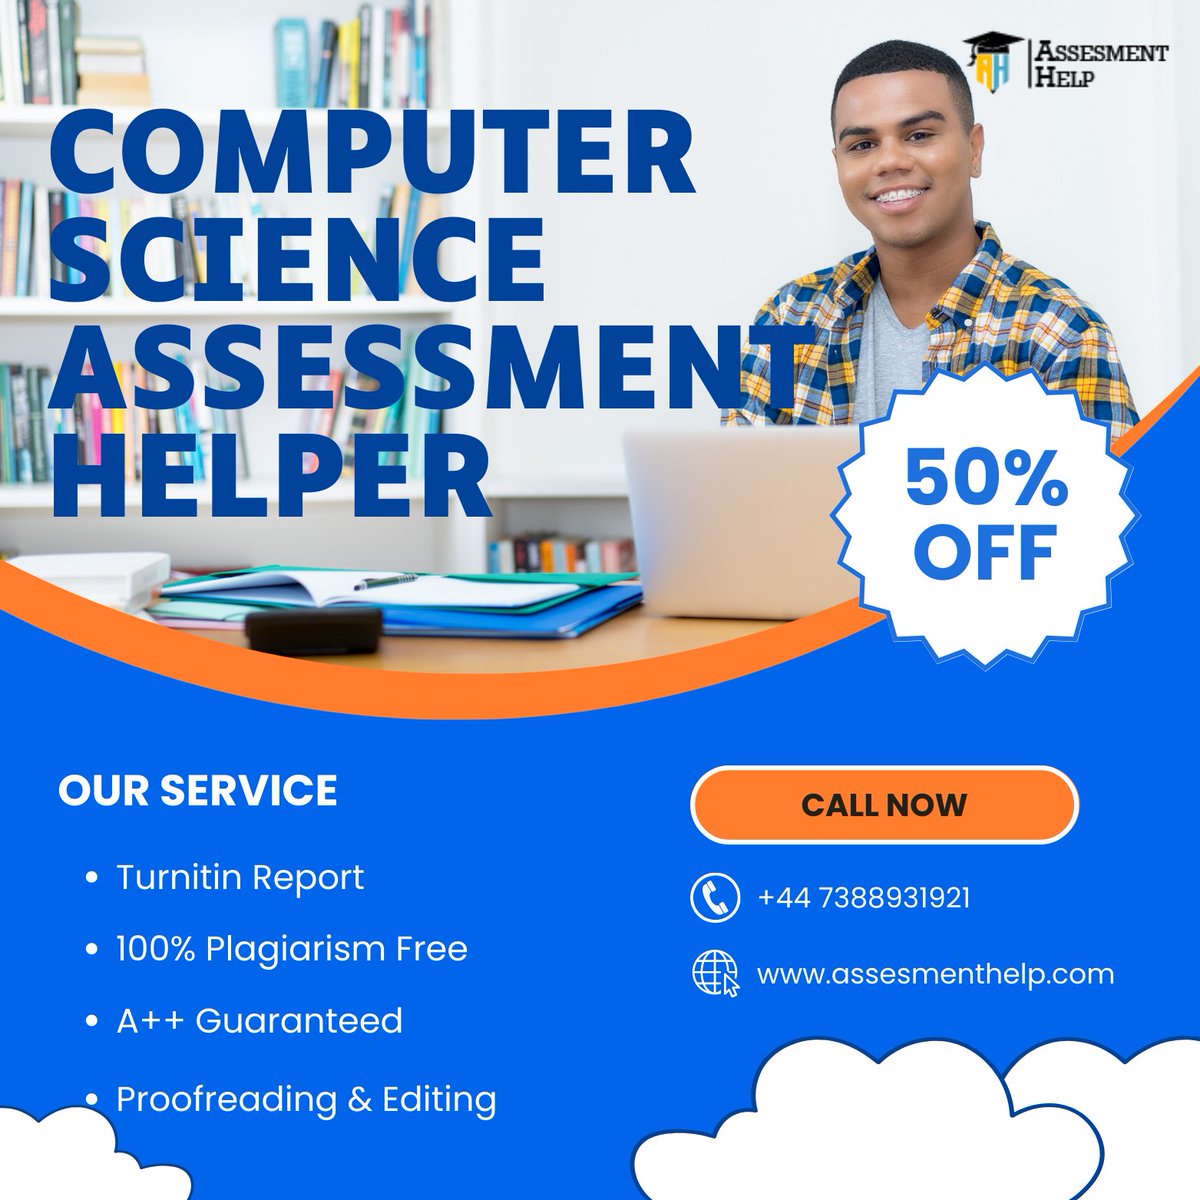 Computer Science Assessment Helper
Take your assignment from Us.
Contact Us: assesmenthelp.com
@assessmentshelp 
#assessmenthelp #assessmenthelper #coaching #training #assessmentday #assessmentcenter #education #assessmenttools #assessmentcentre #assessmentsolutions #selfas